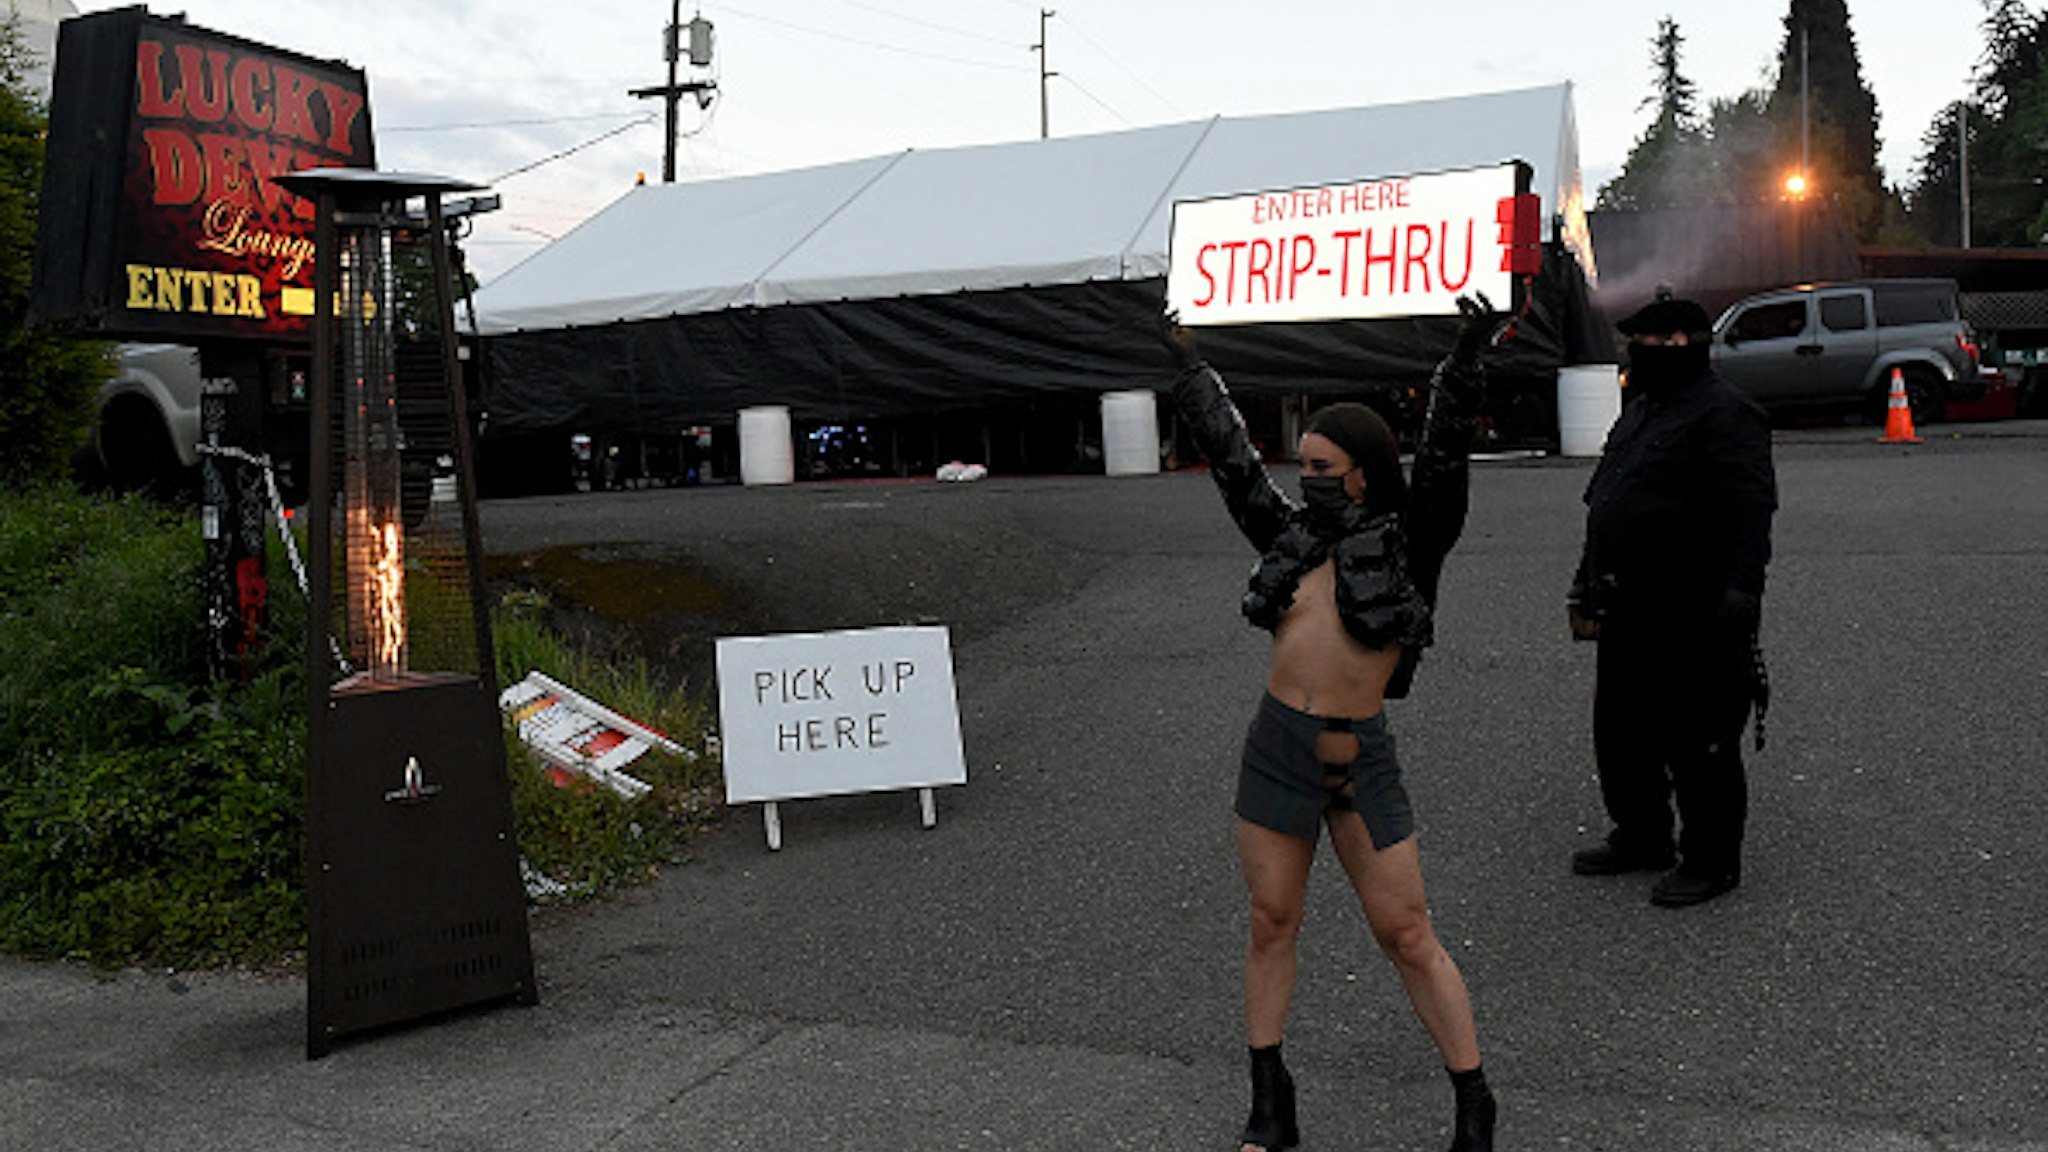 PORTLAND, OREGON - MAY 01: Dancer Nikki waves a sign in front of The Lucky Devil during the Drive-thru on May 01, 2020 in Portland, Oregon. The strip club offers drive thru dances during the Coronavirus Pandemic.